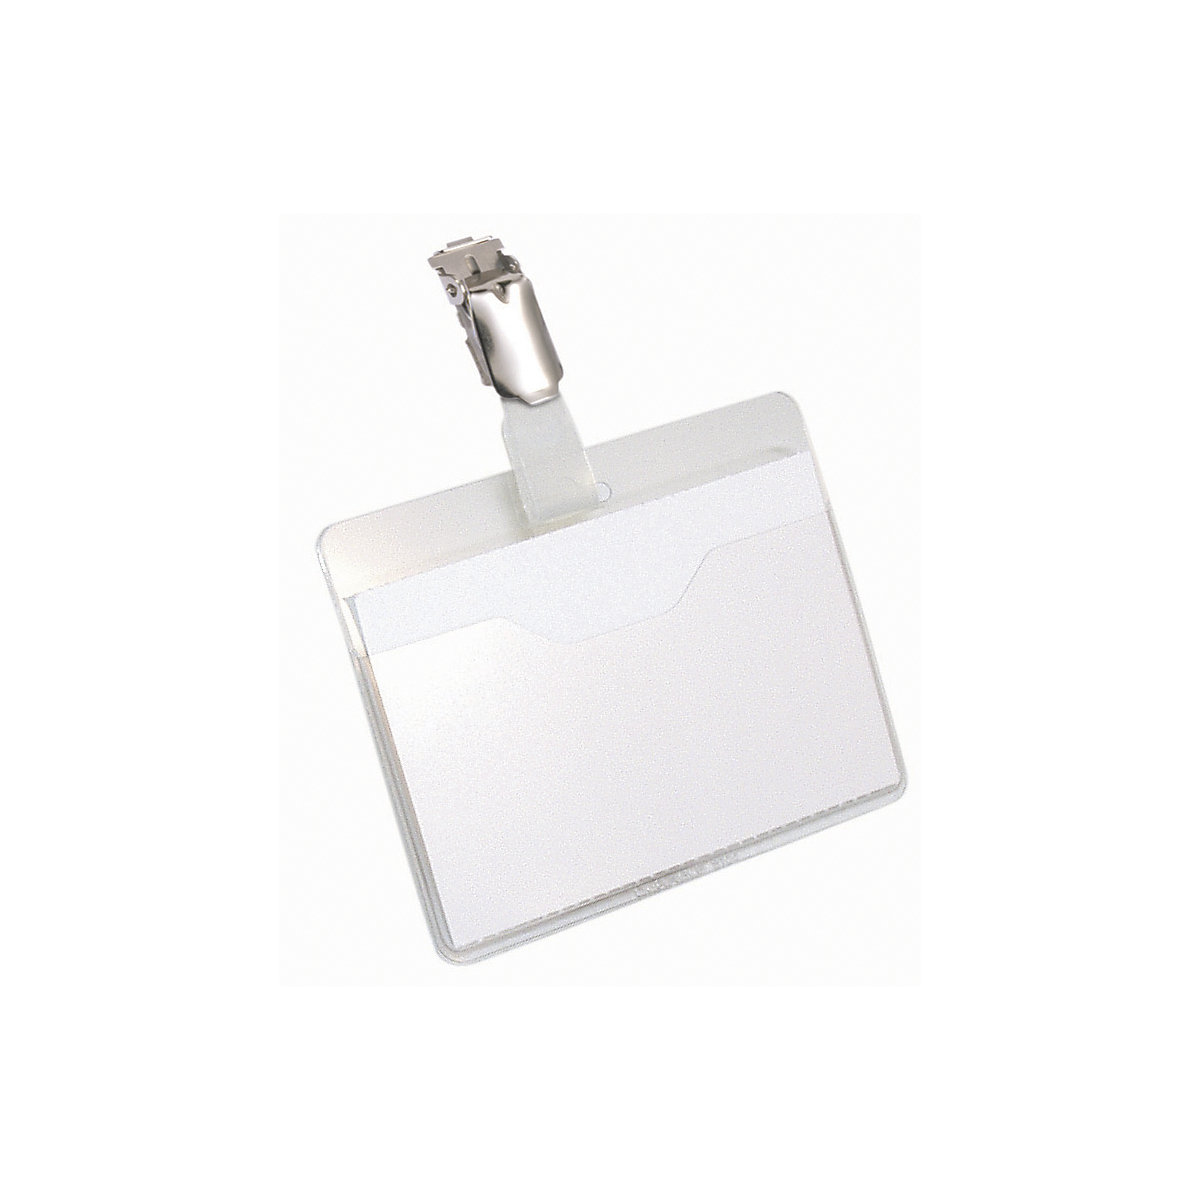 Name badges with clip fastener – DURABLE